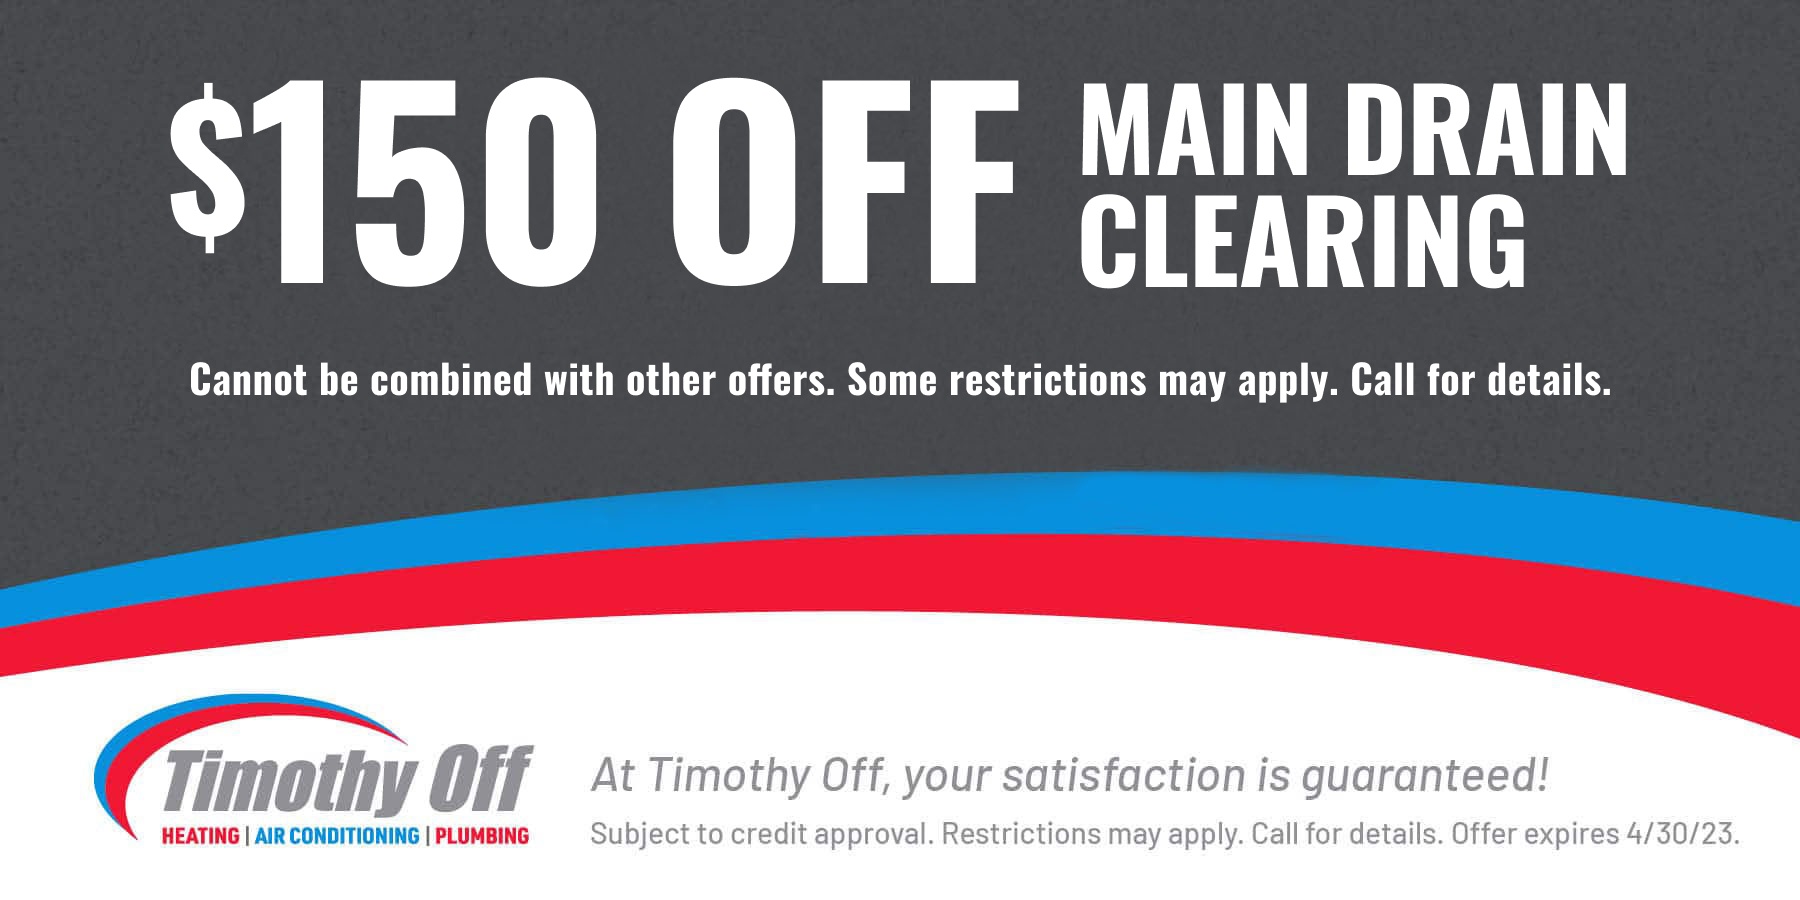 $150 Off Main Drain Clearing